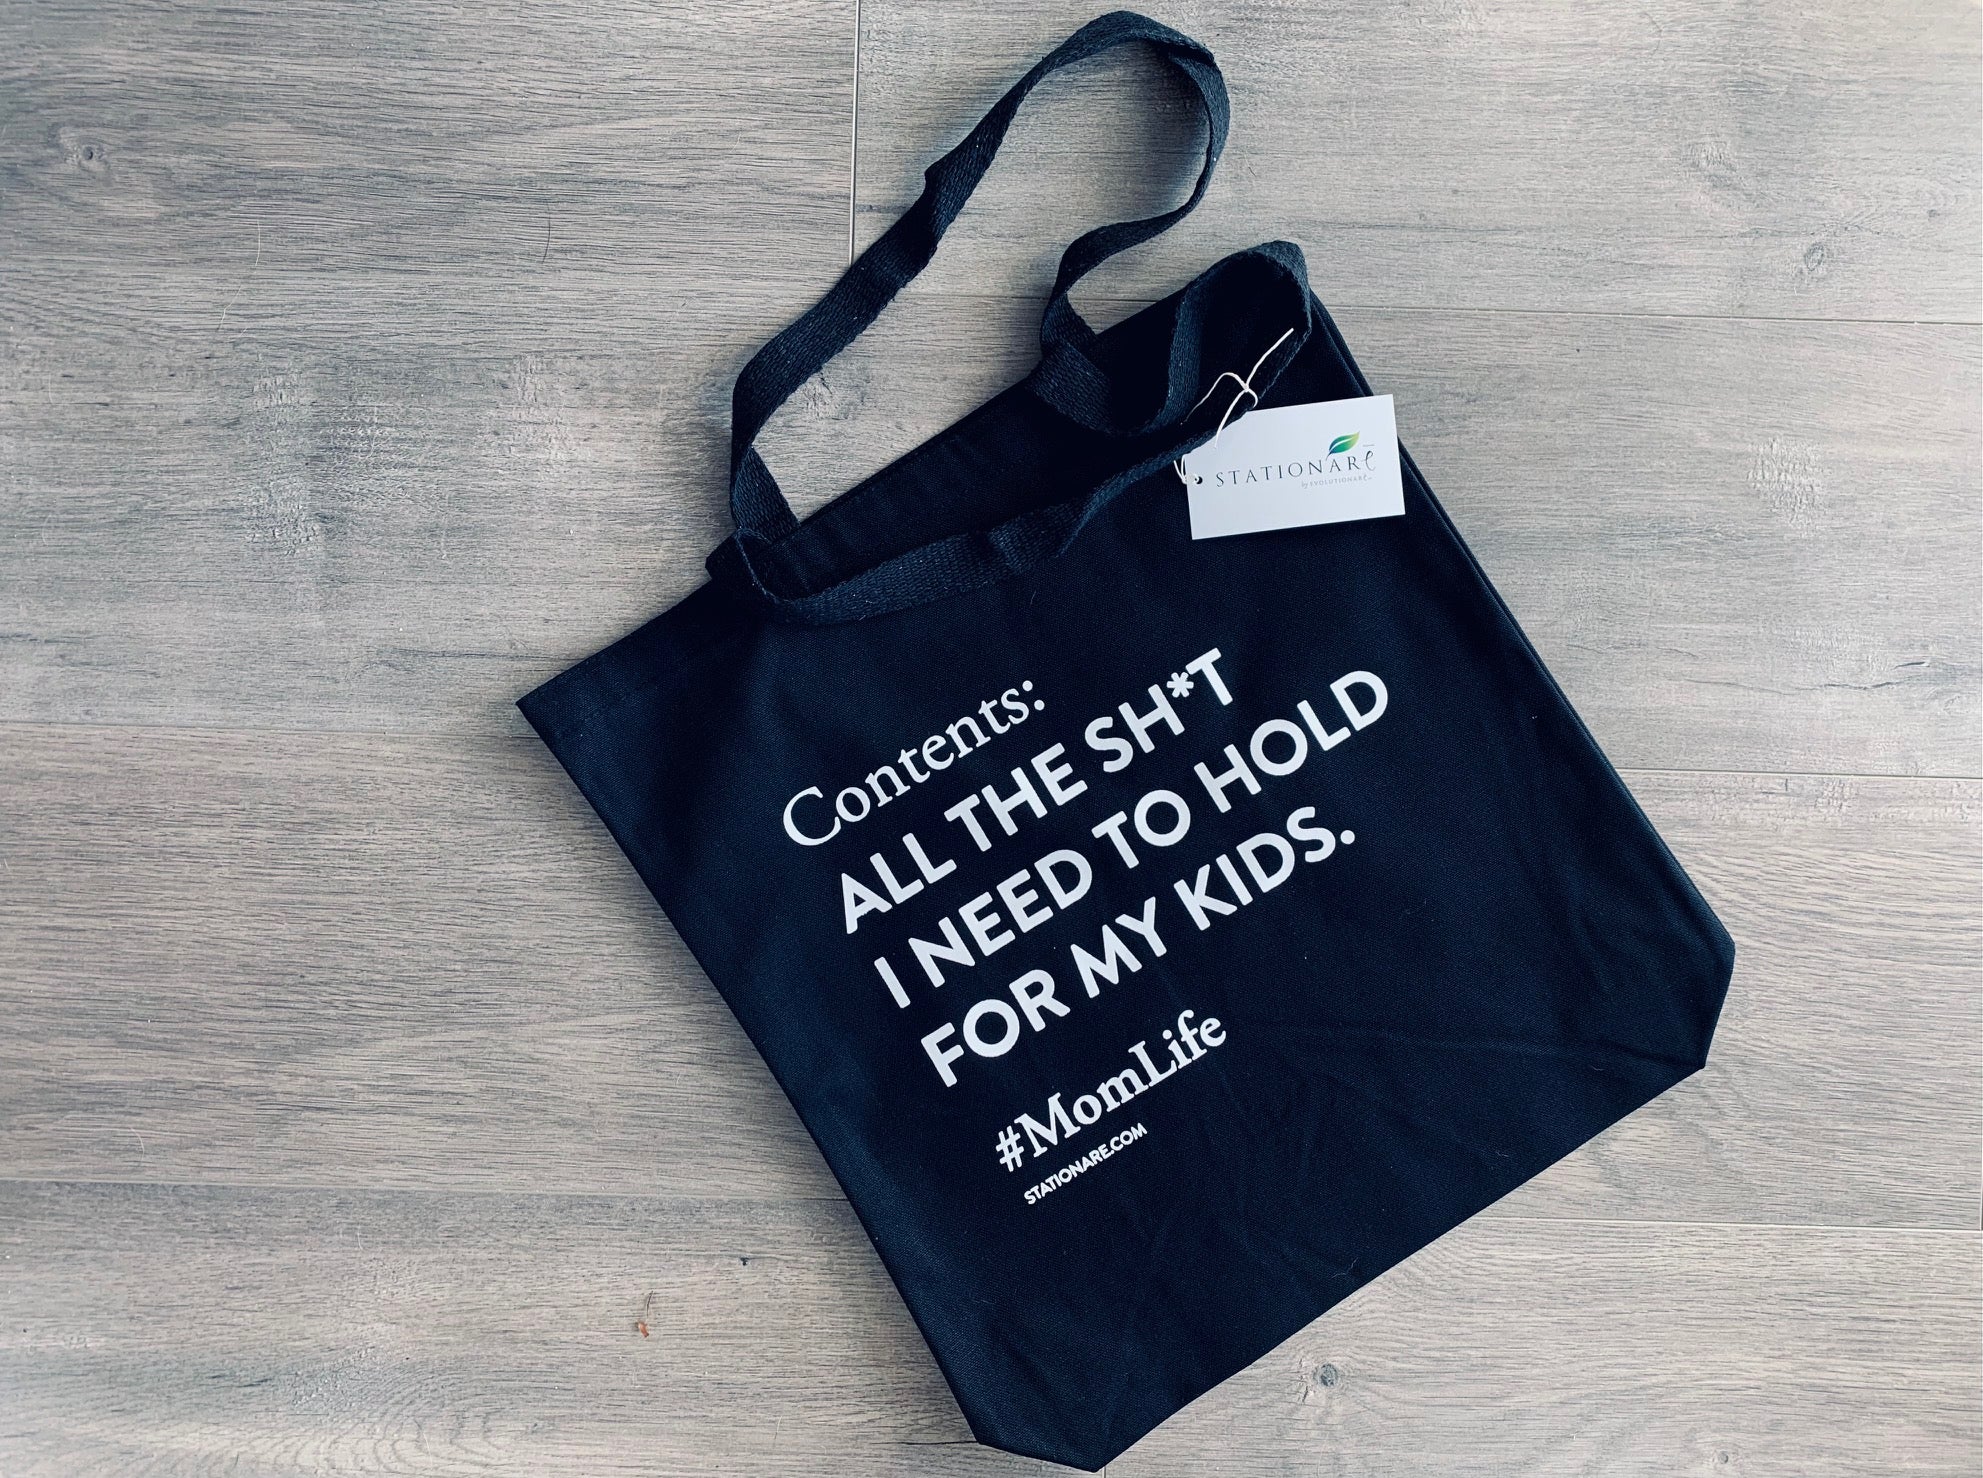 Contents for my kids tote by stationare